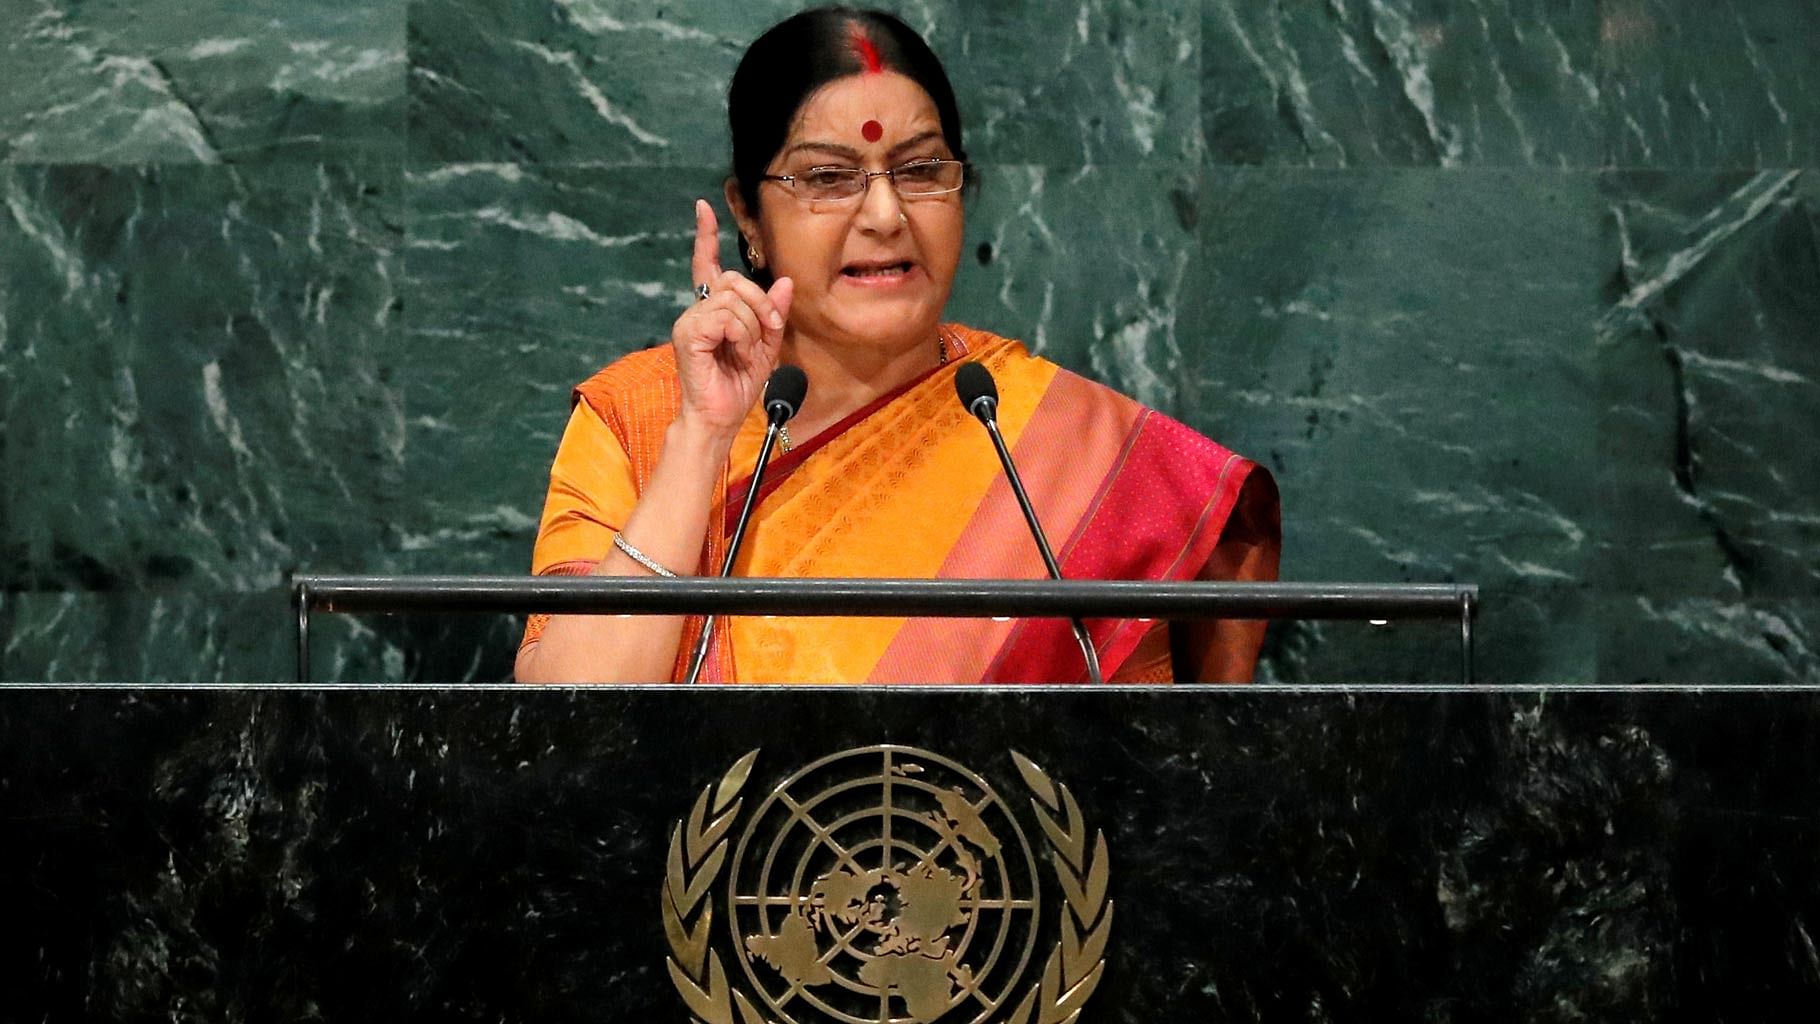 Minister of External Affairs Sushma Swaraj addresses the UNGA in the Manhattan borough of New York, US, on 26 September 2016. (Photo: Reuters)